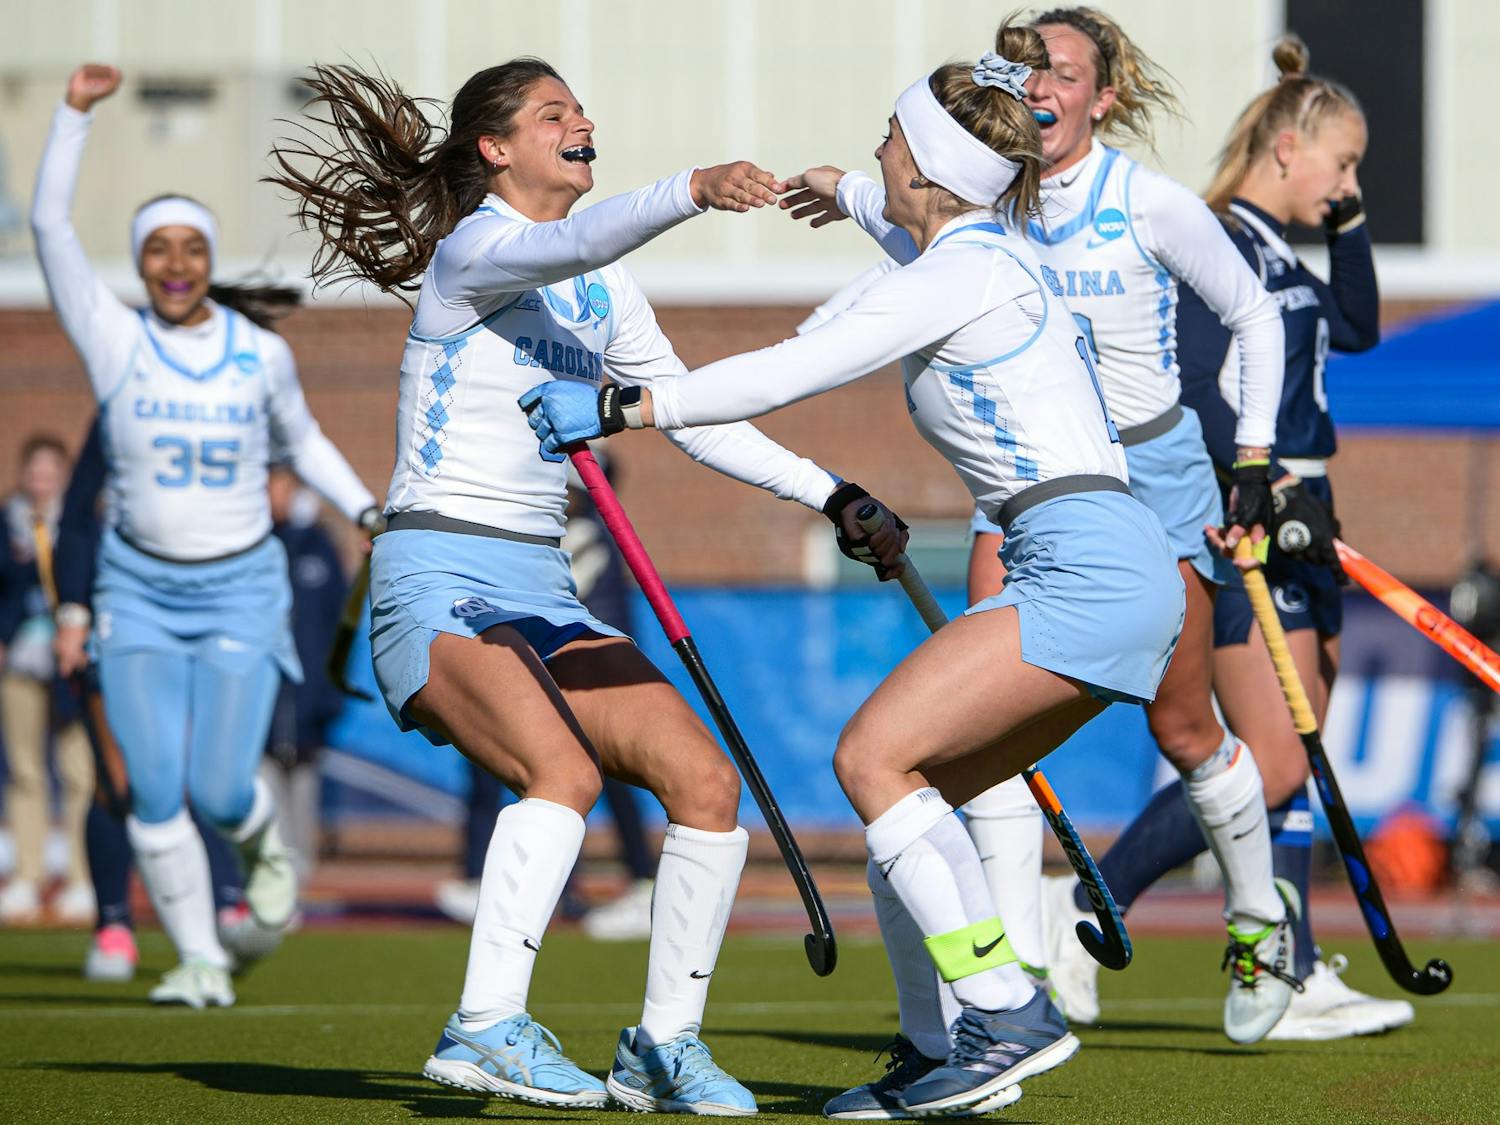 UNC junior back Ciana Riccardo (8) and senior forward Erin Matson (1) celebrate a goal in the second quarter of the field hockey game against No. 6 Penn State on Friday, Nov. 18, 2022, at the George J. Sherman Sports Complex in Storrs, Conn. UNC beat Penn State 3-0.